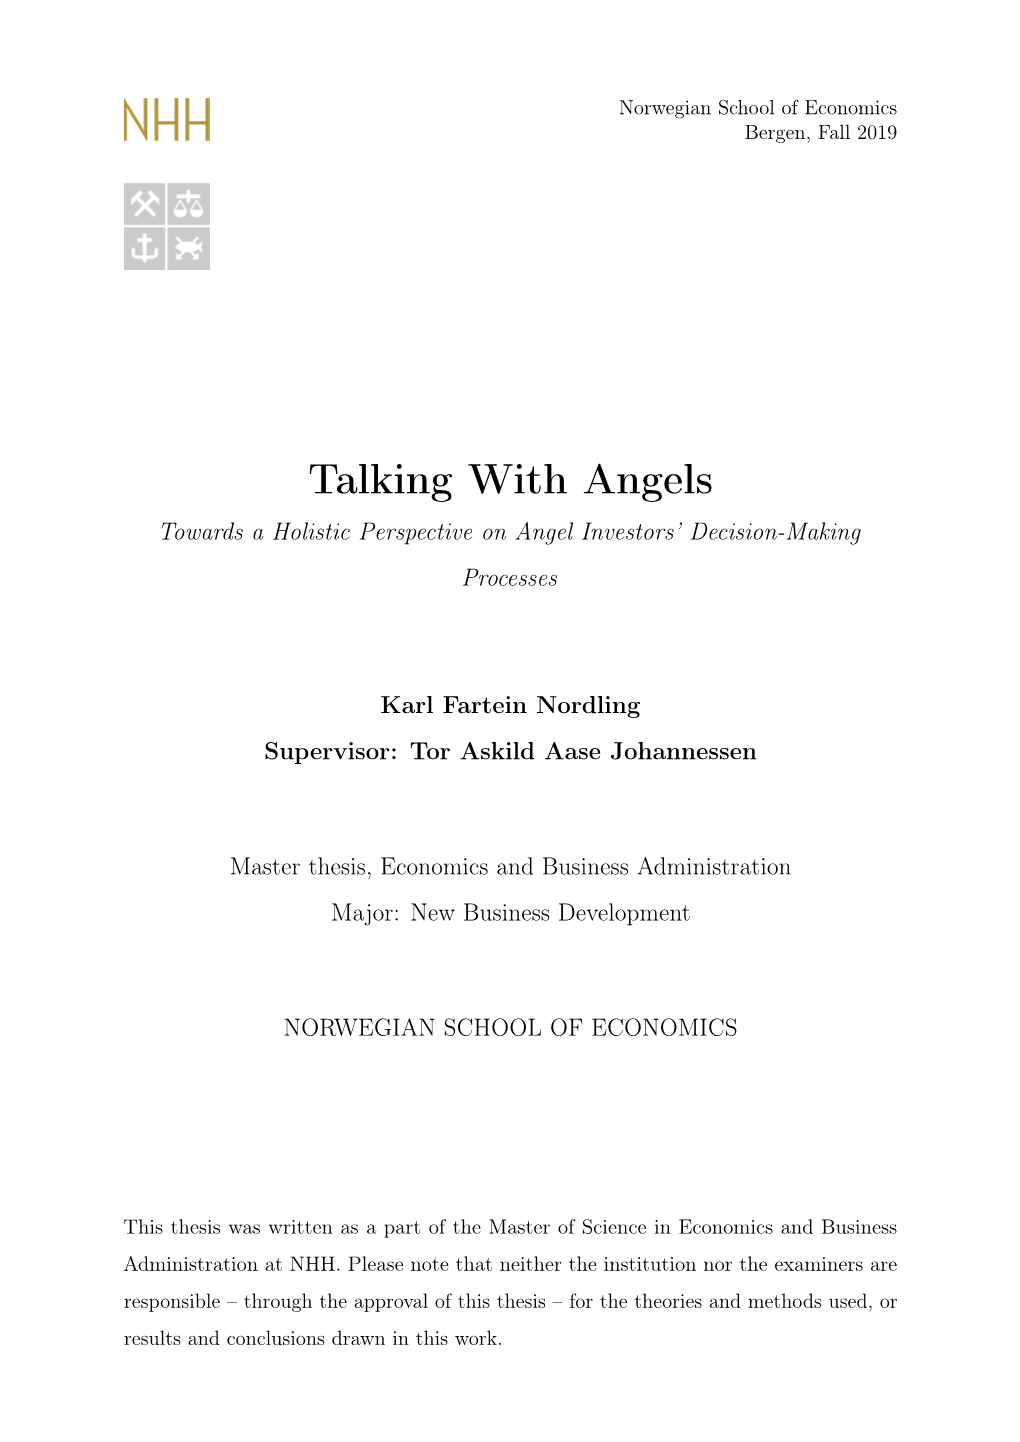 Talking with Angels Towards a Holistic Perspective on Angel Investors’ Decision-Making Processes